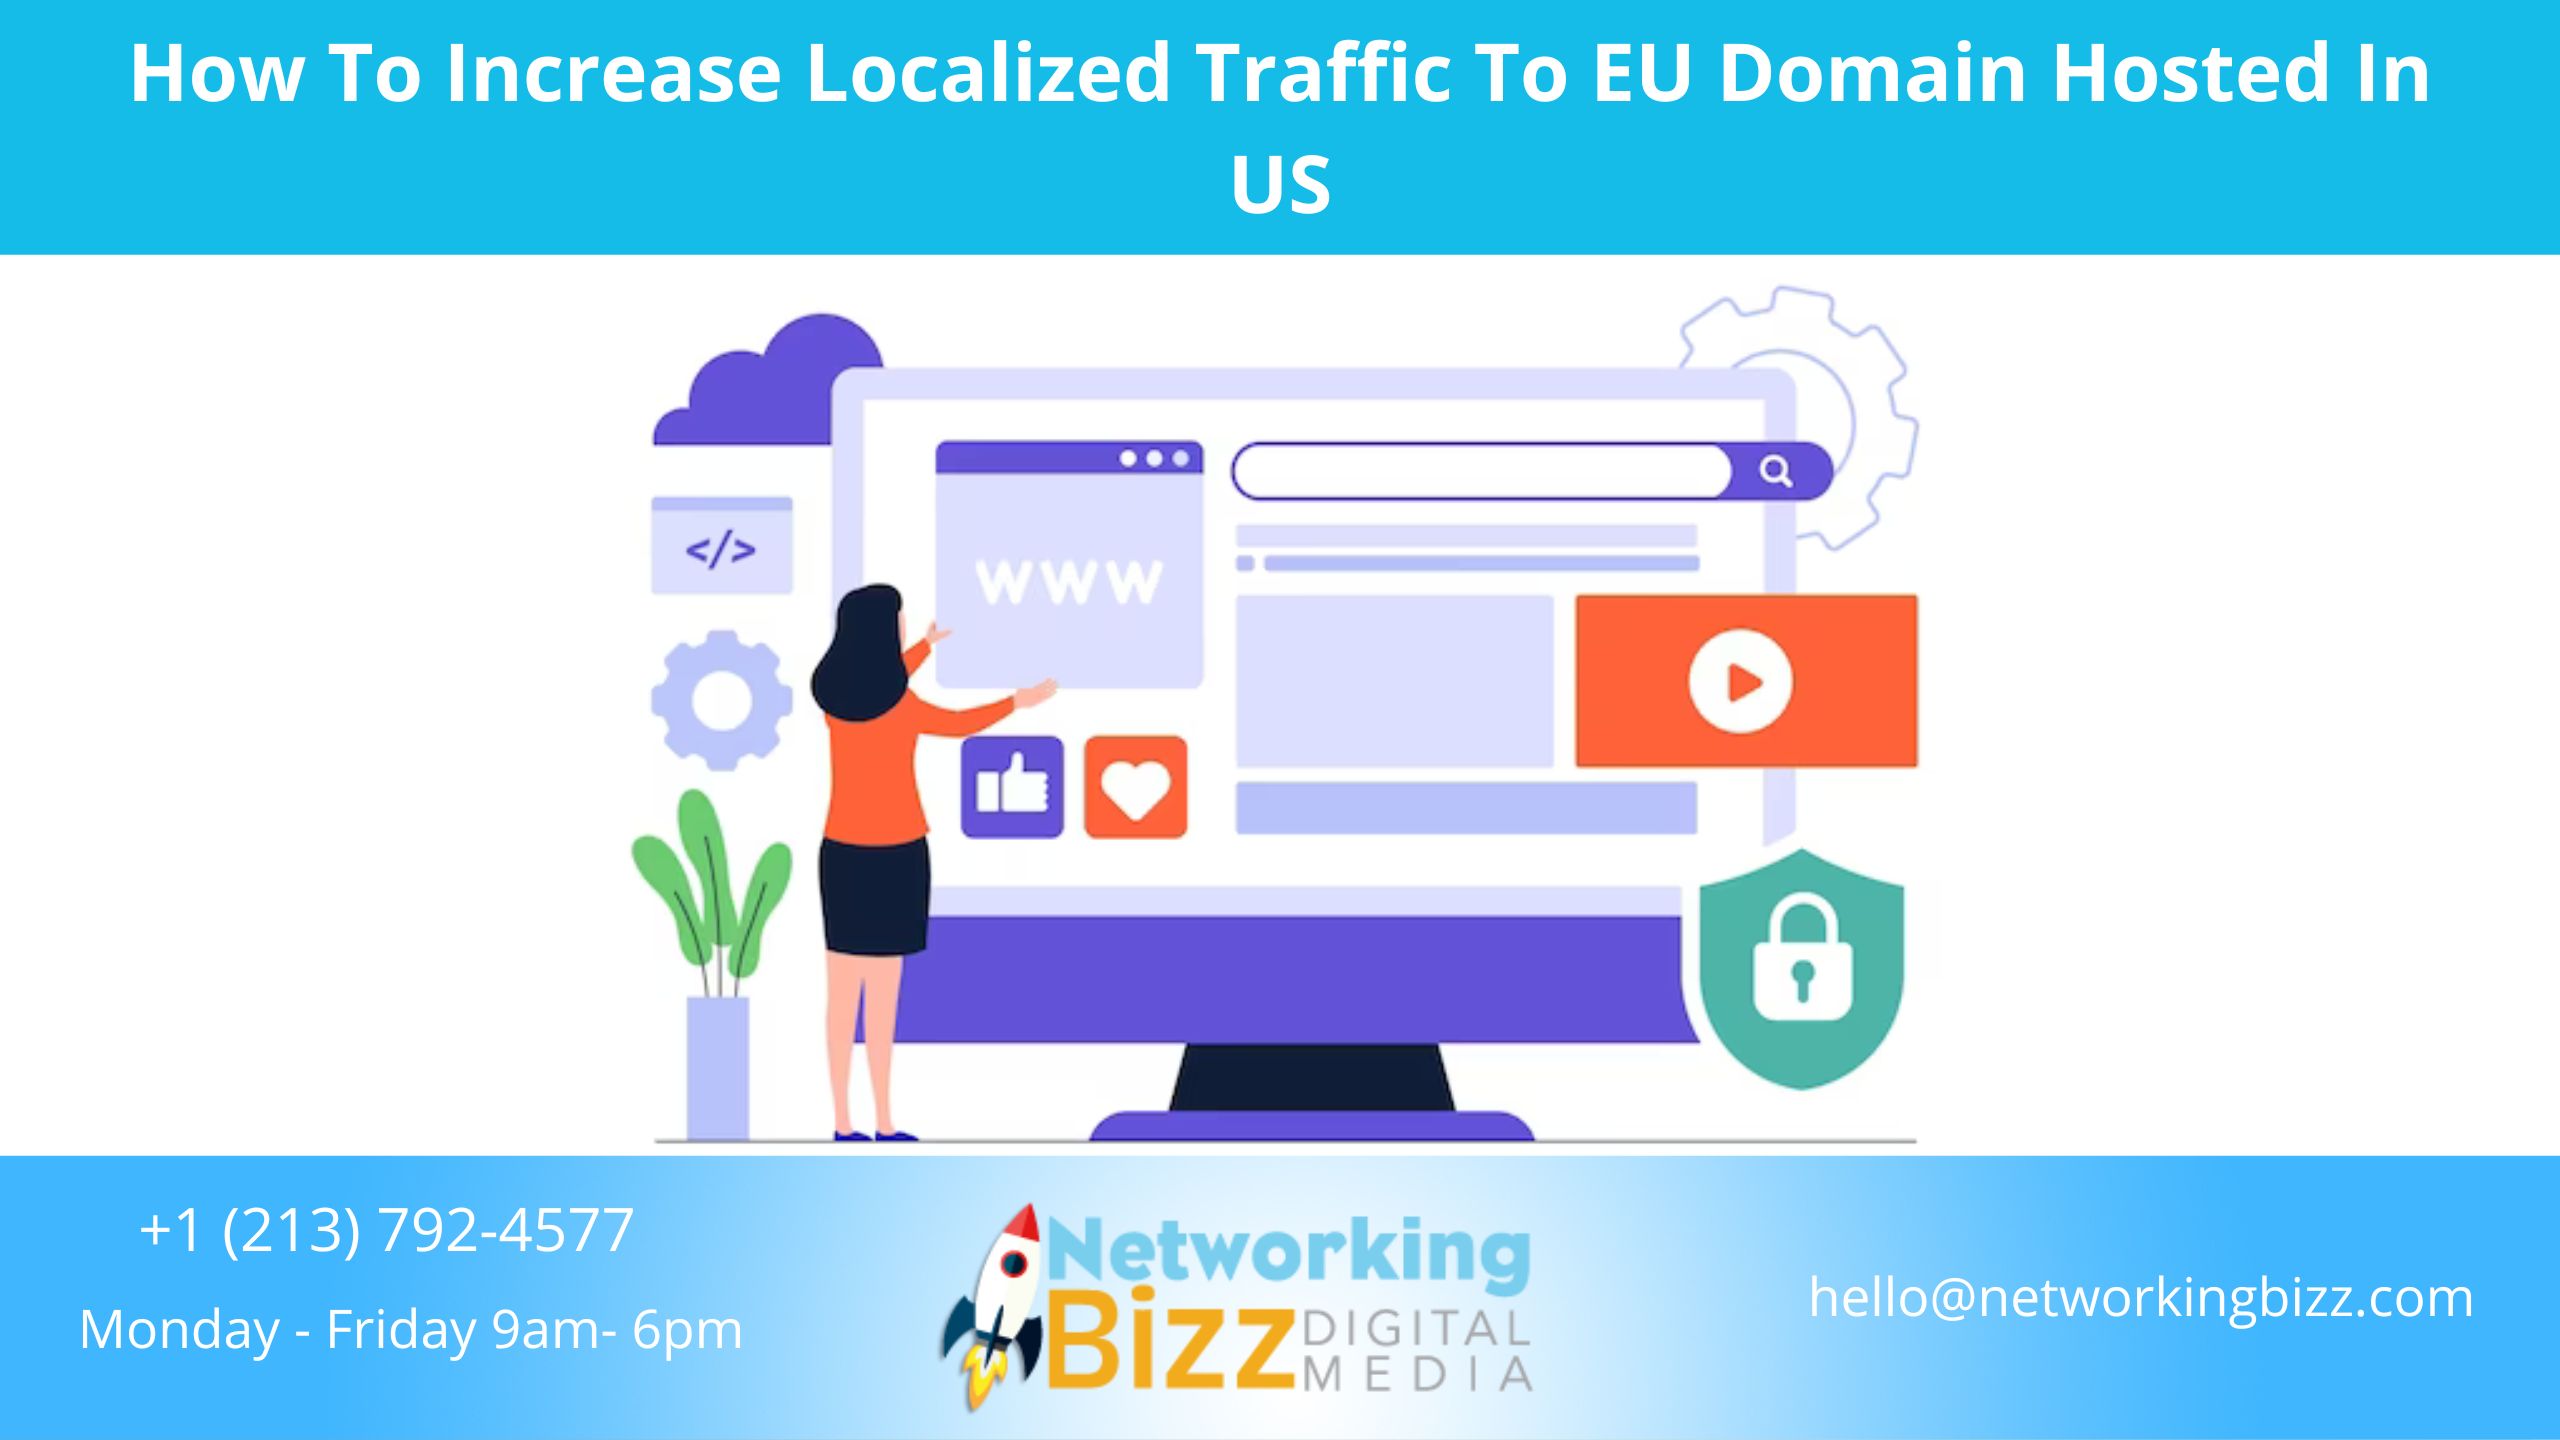 How To Increase Localized Traffic To EU Domain Hosted In US